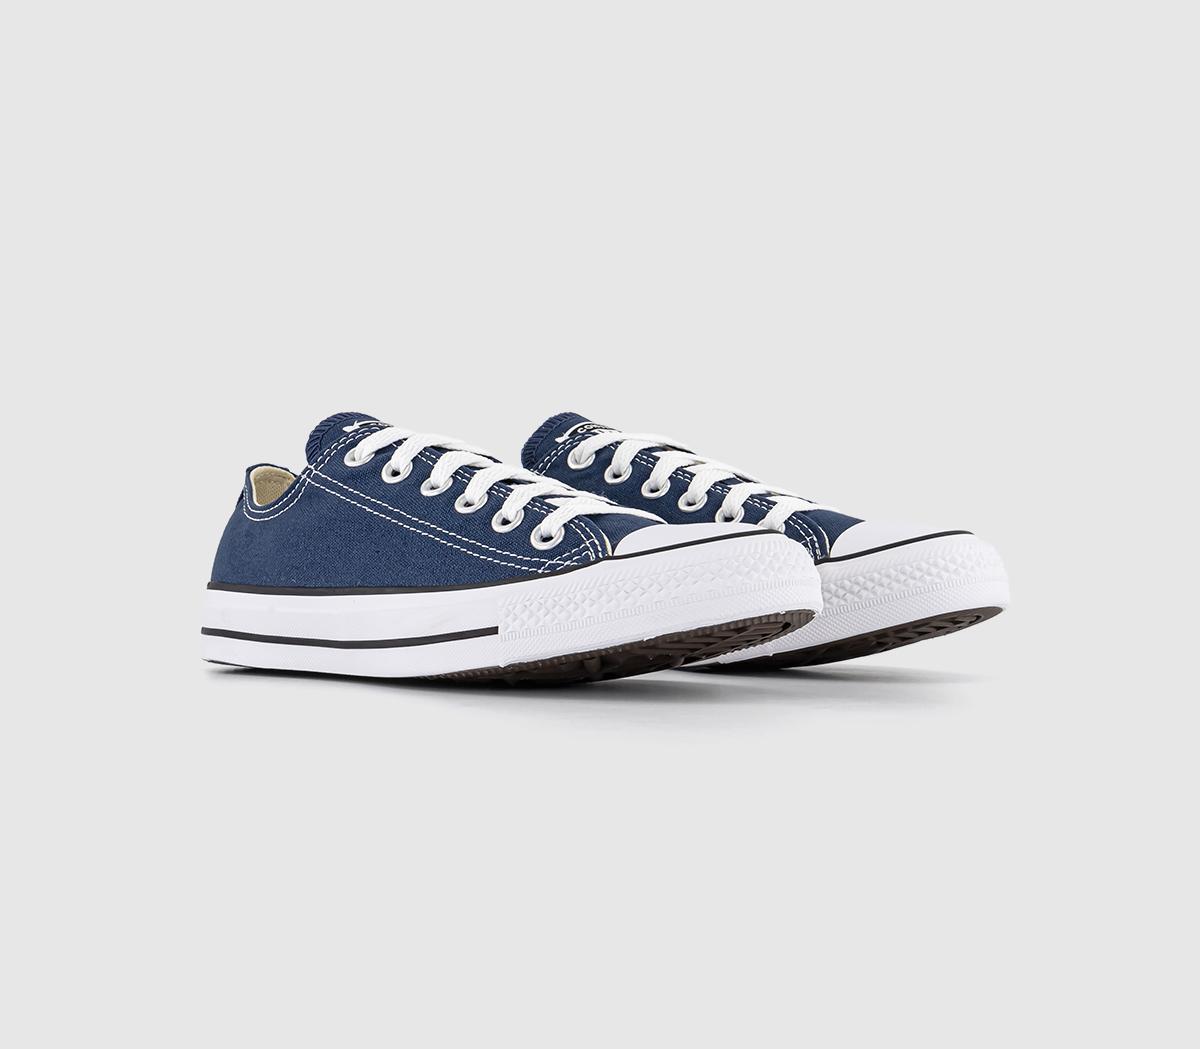 Mens Converse All Star Low Canvas Trainers In Navy Blue And White, 7